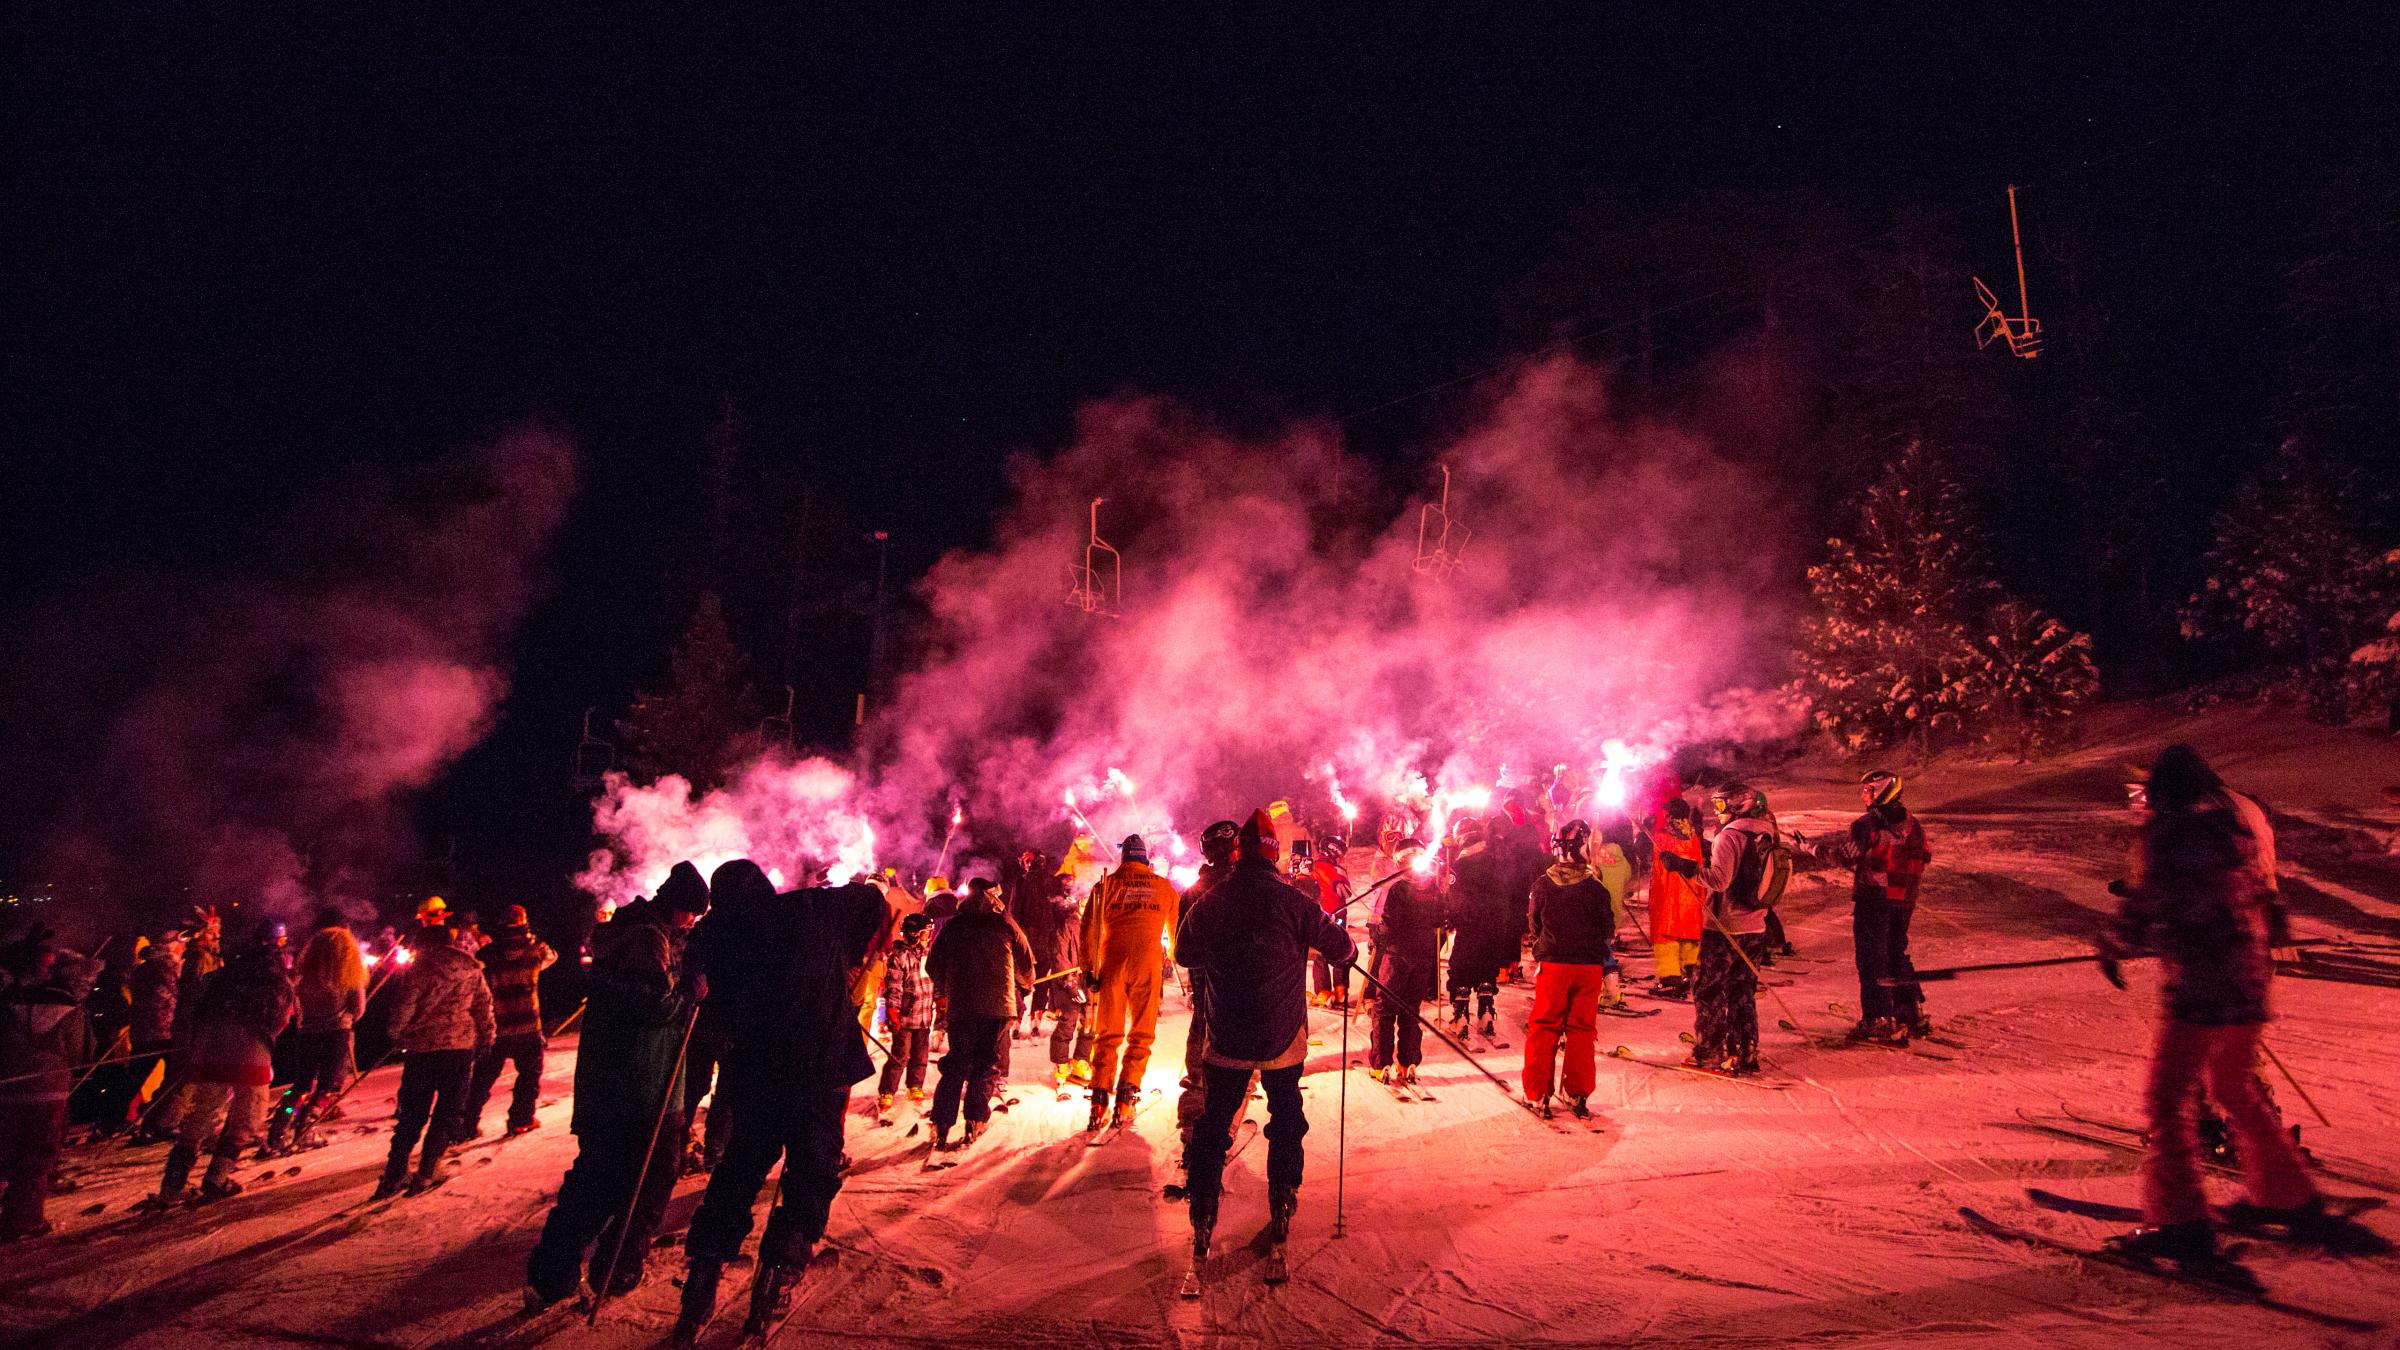 Torchlight Parade on the snow